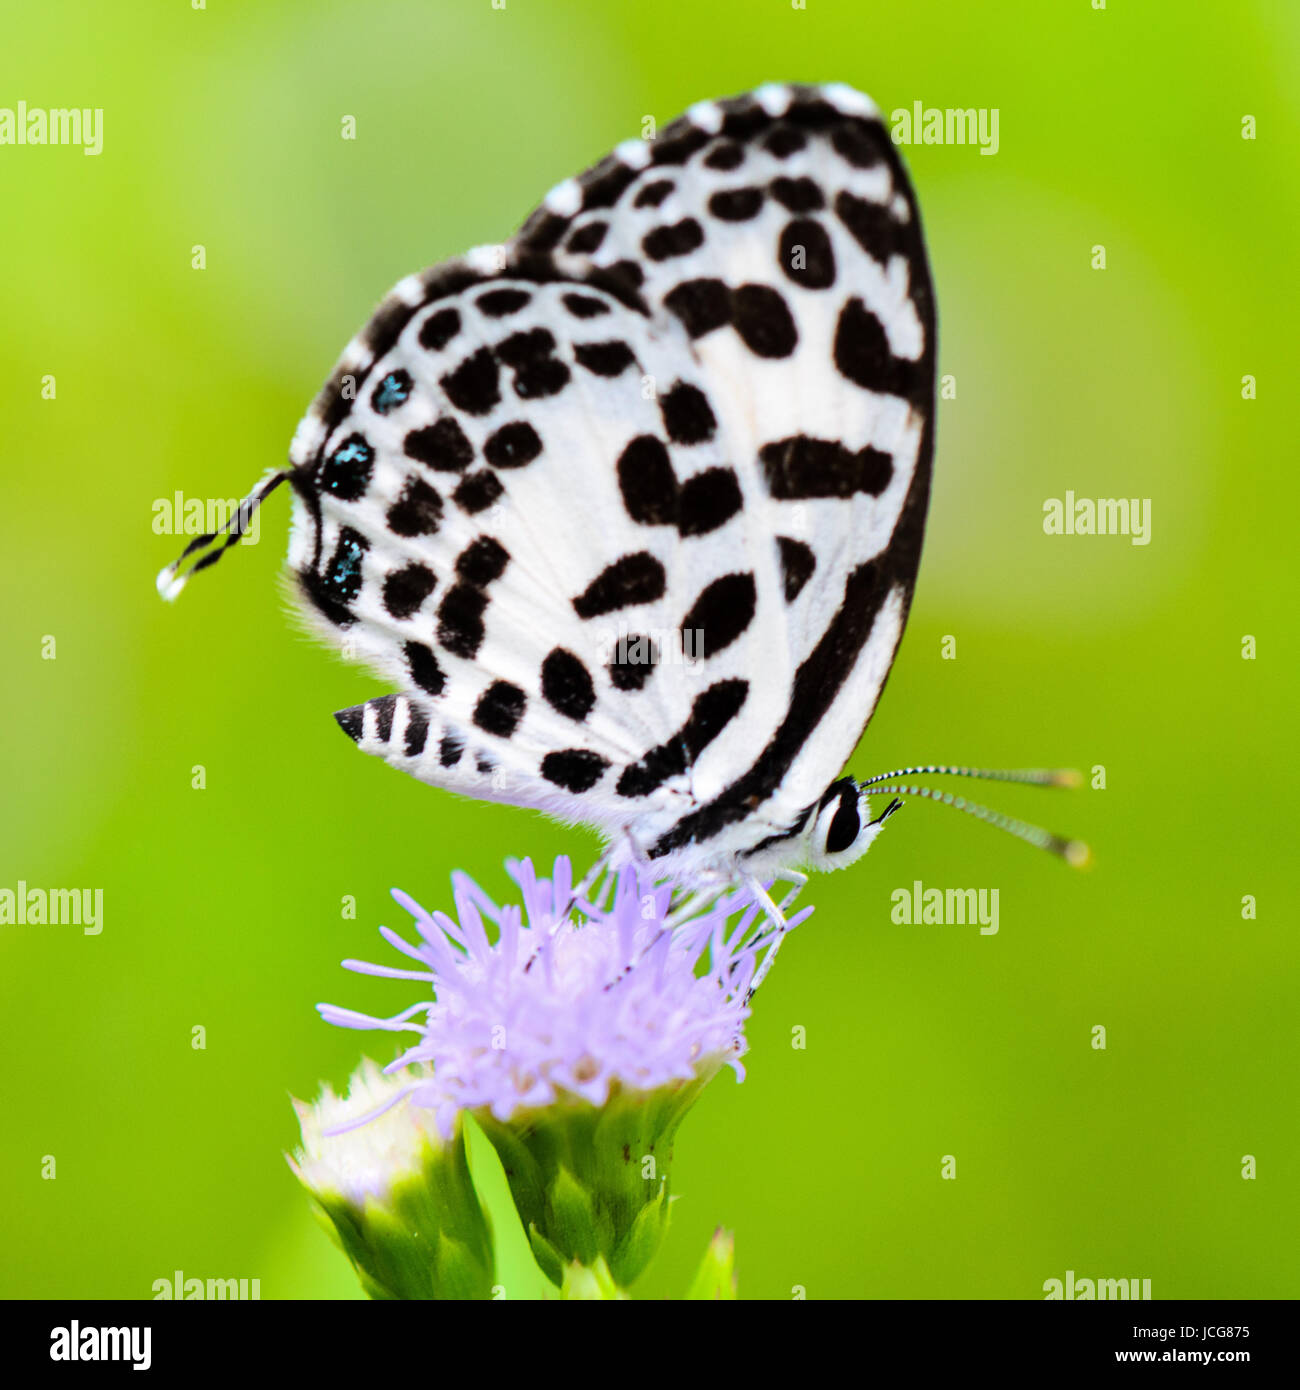 White Butterfly With Black Spots High Resolution Stock Photography And Images Alamy